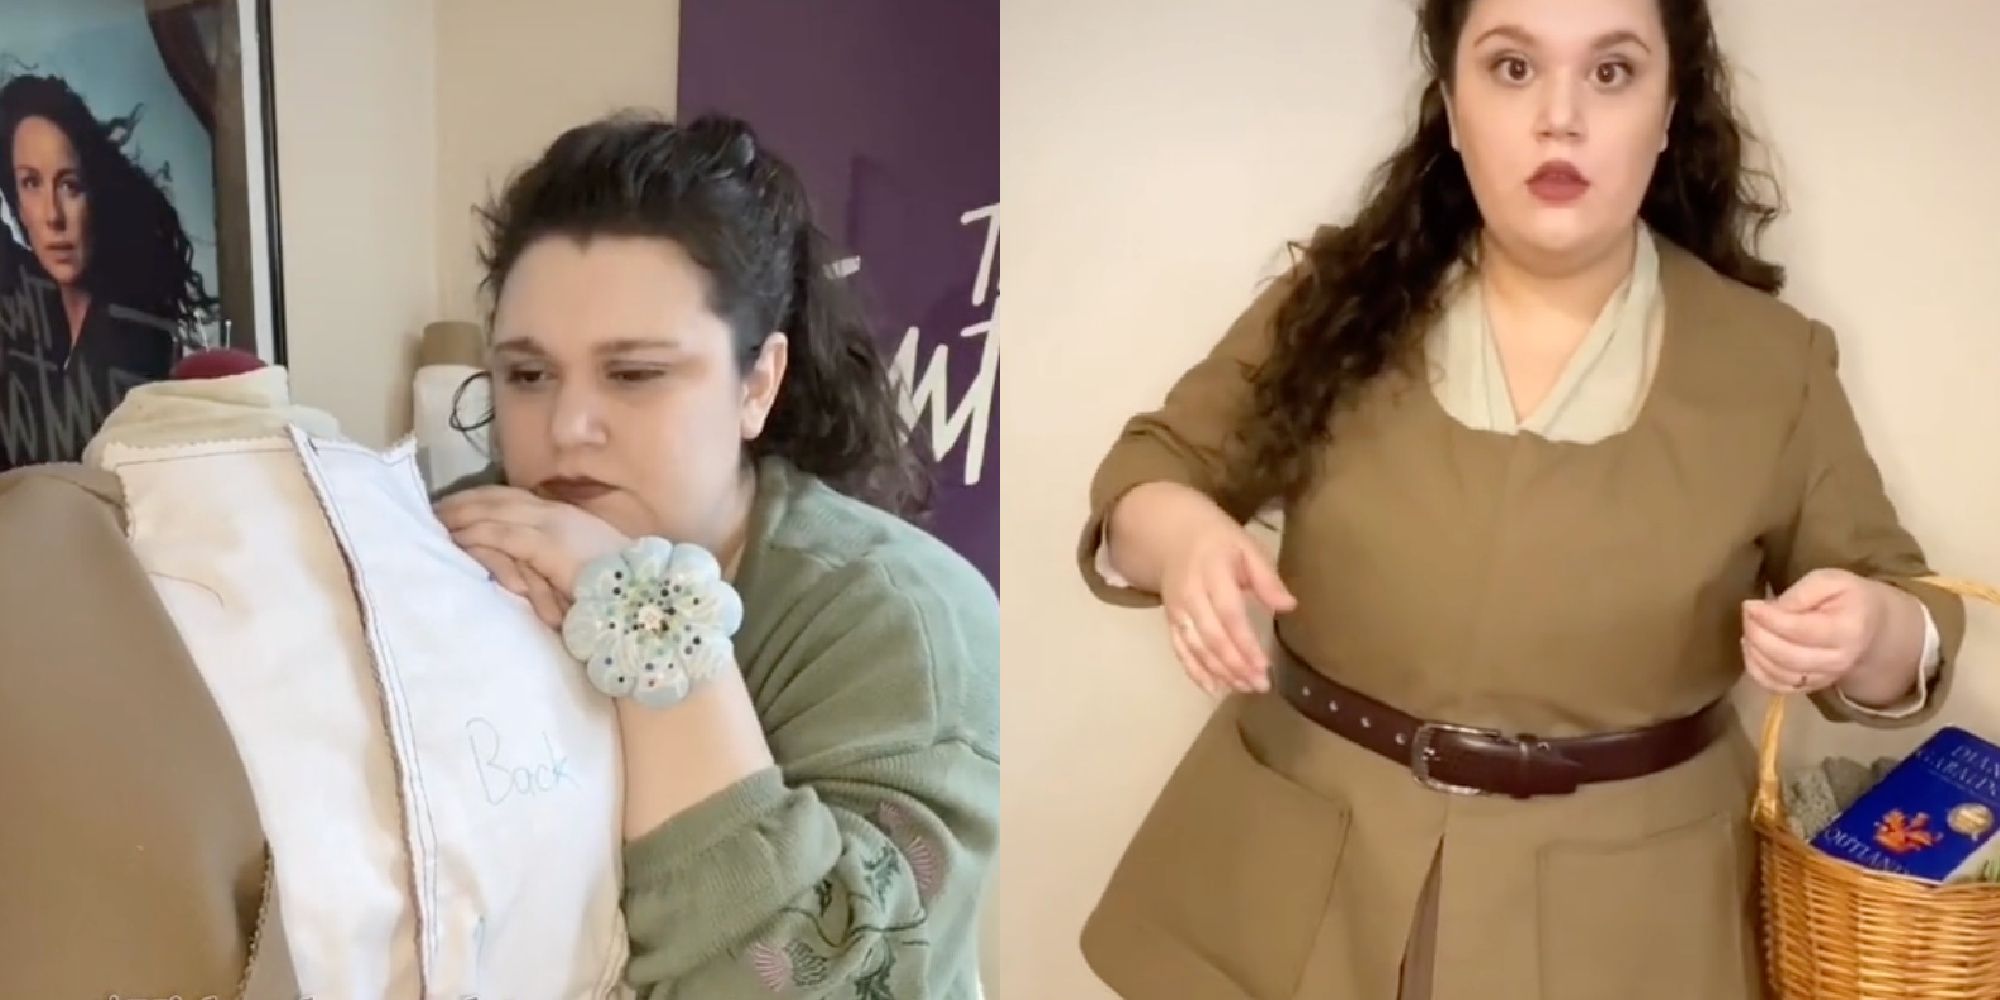 An Outlander fan making a gown for the show on TikTok